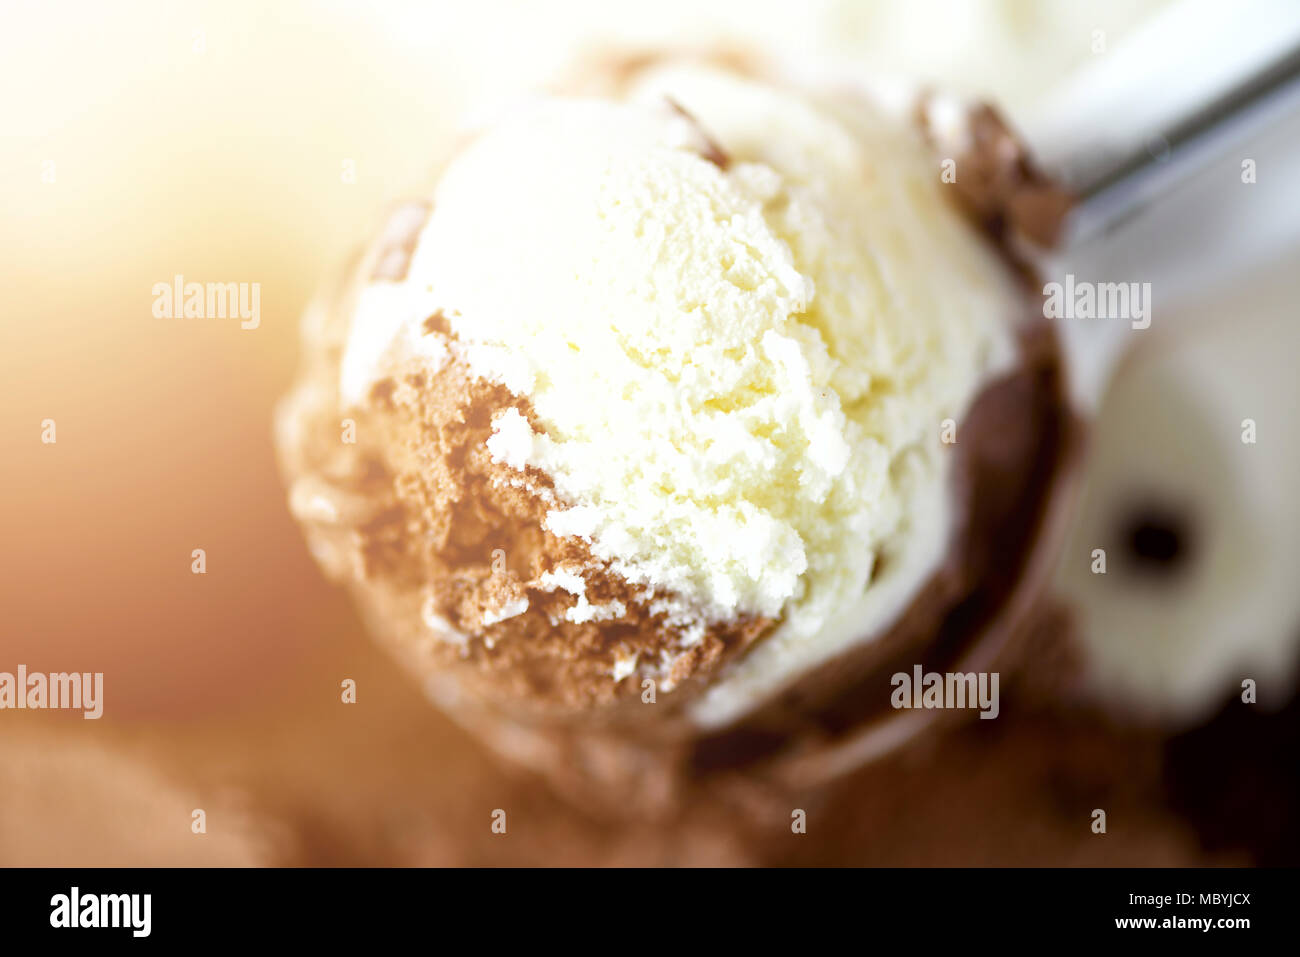 Scooped vanilla and chocolate ice cream background. Summer food concept, copy space, top view. Sweet yogurt dessert or brown ice-cream texture. Stock Photo